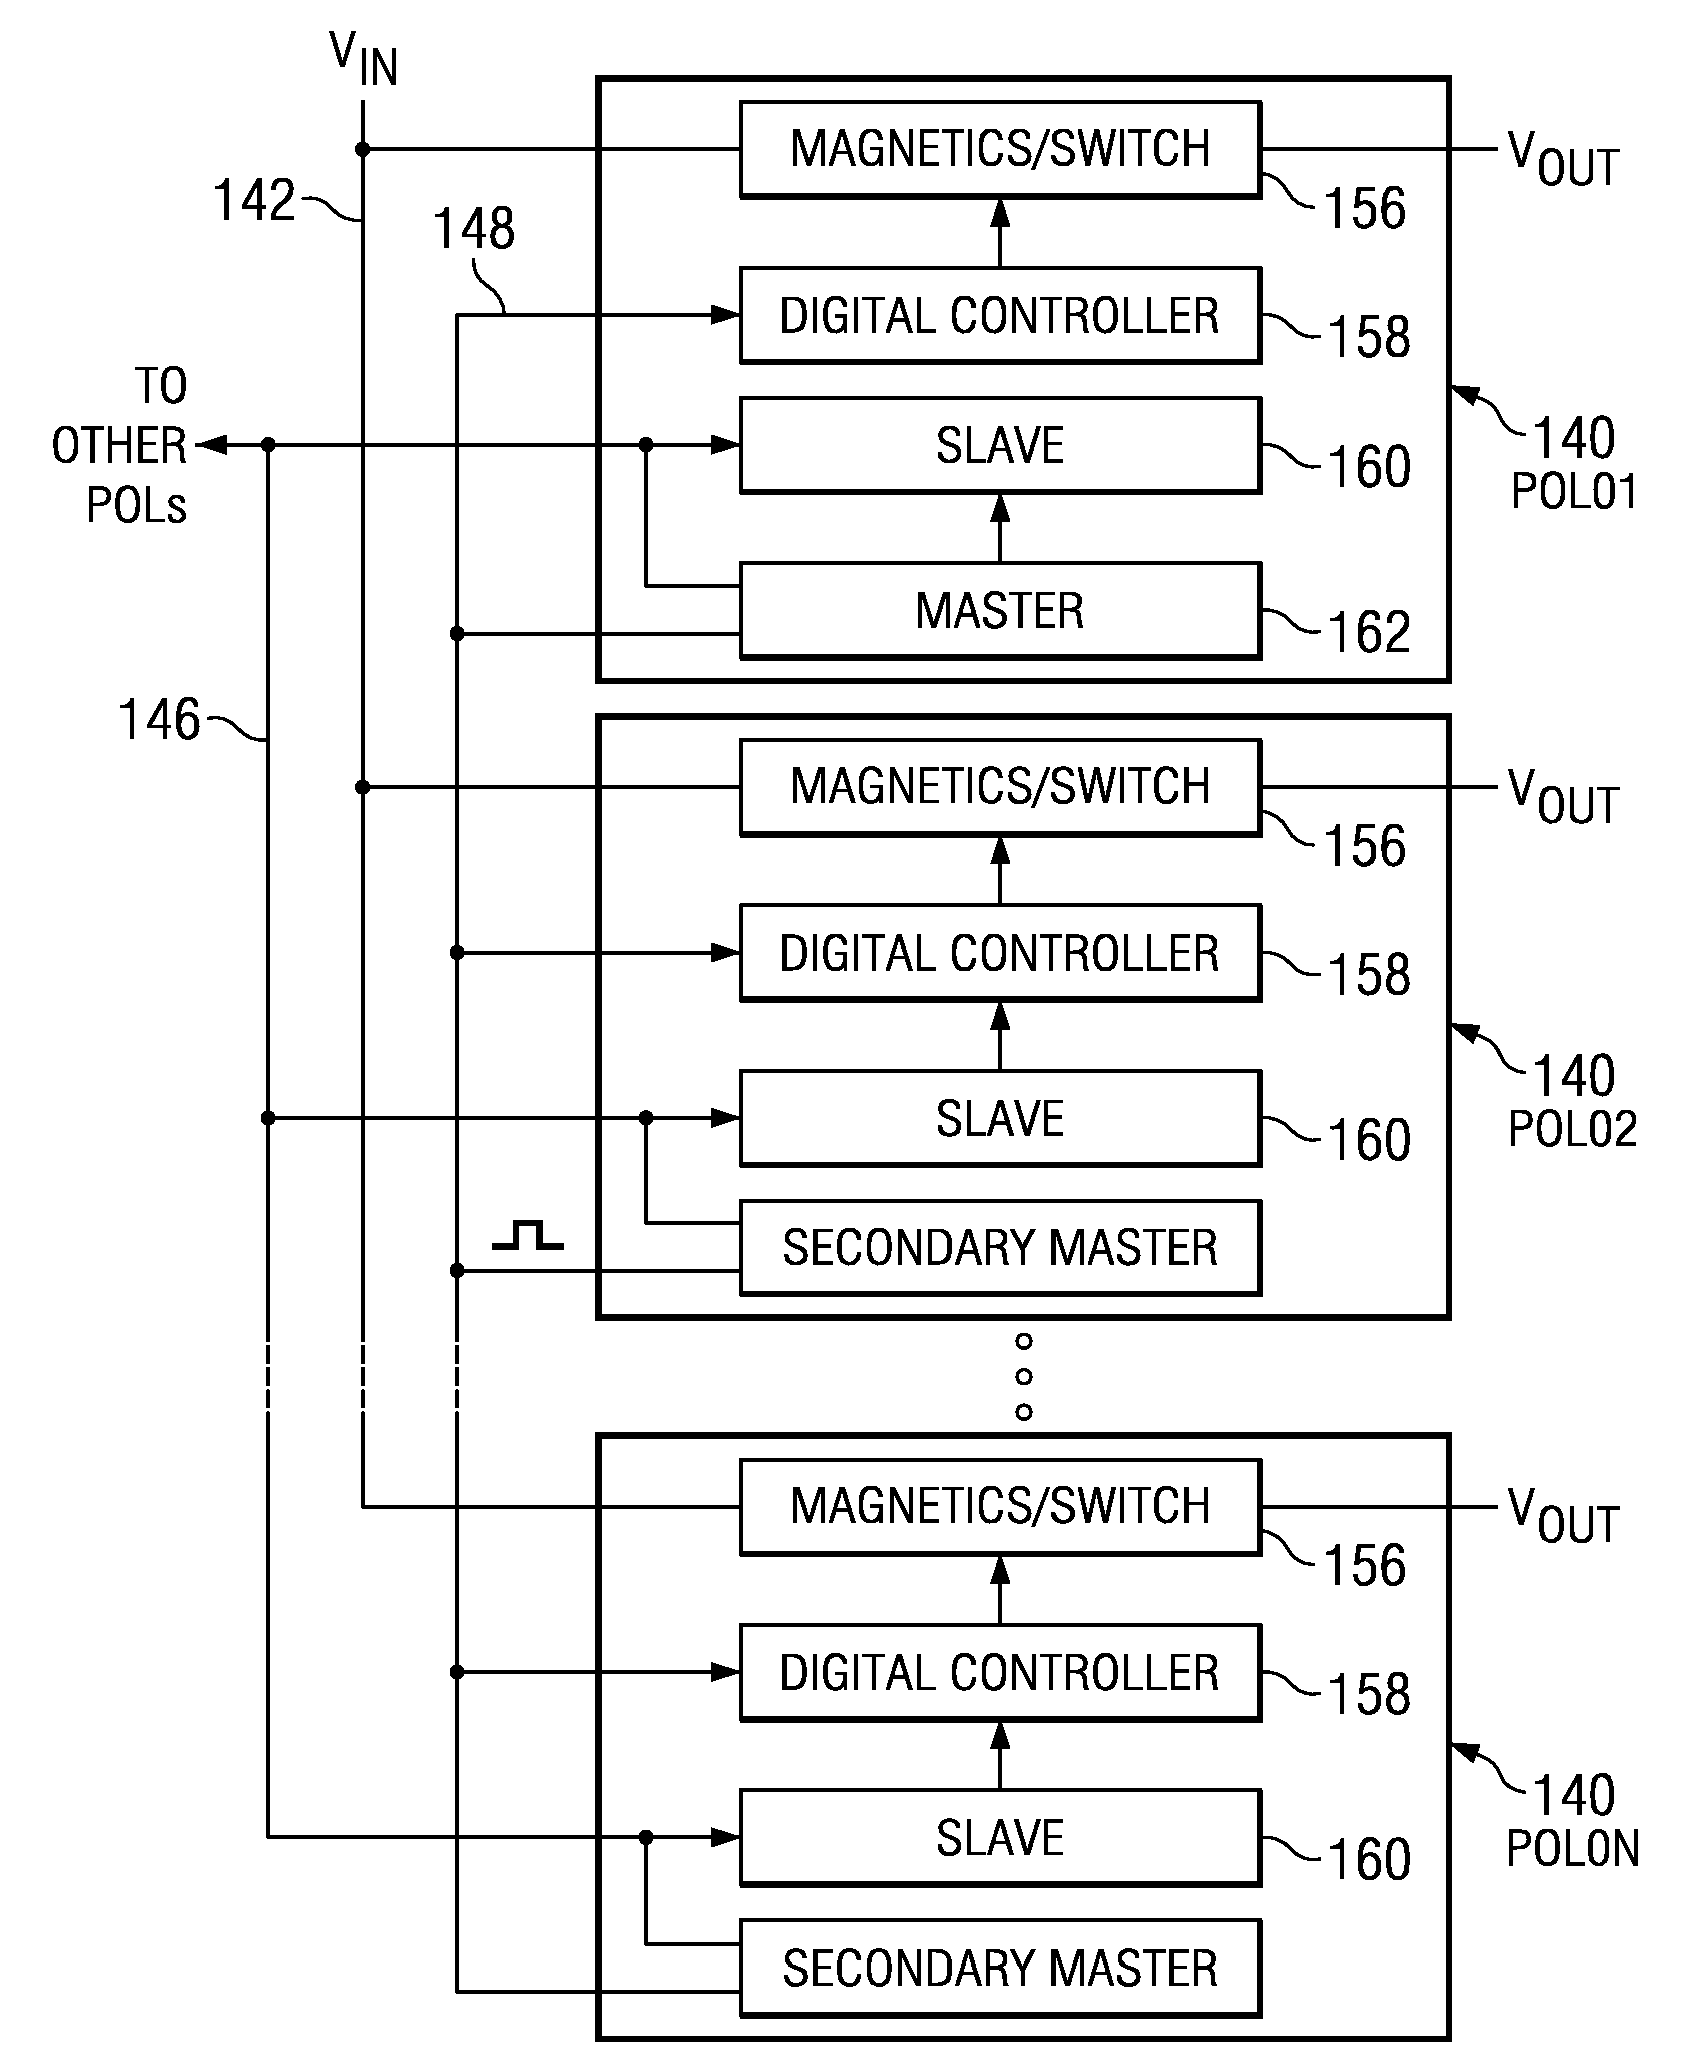 Distributed power supply system with shared master for controlling remote digital DC/DC converter